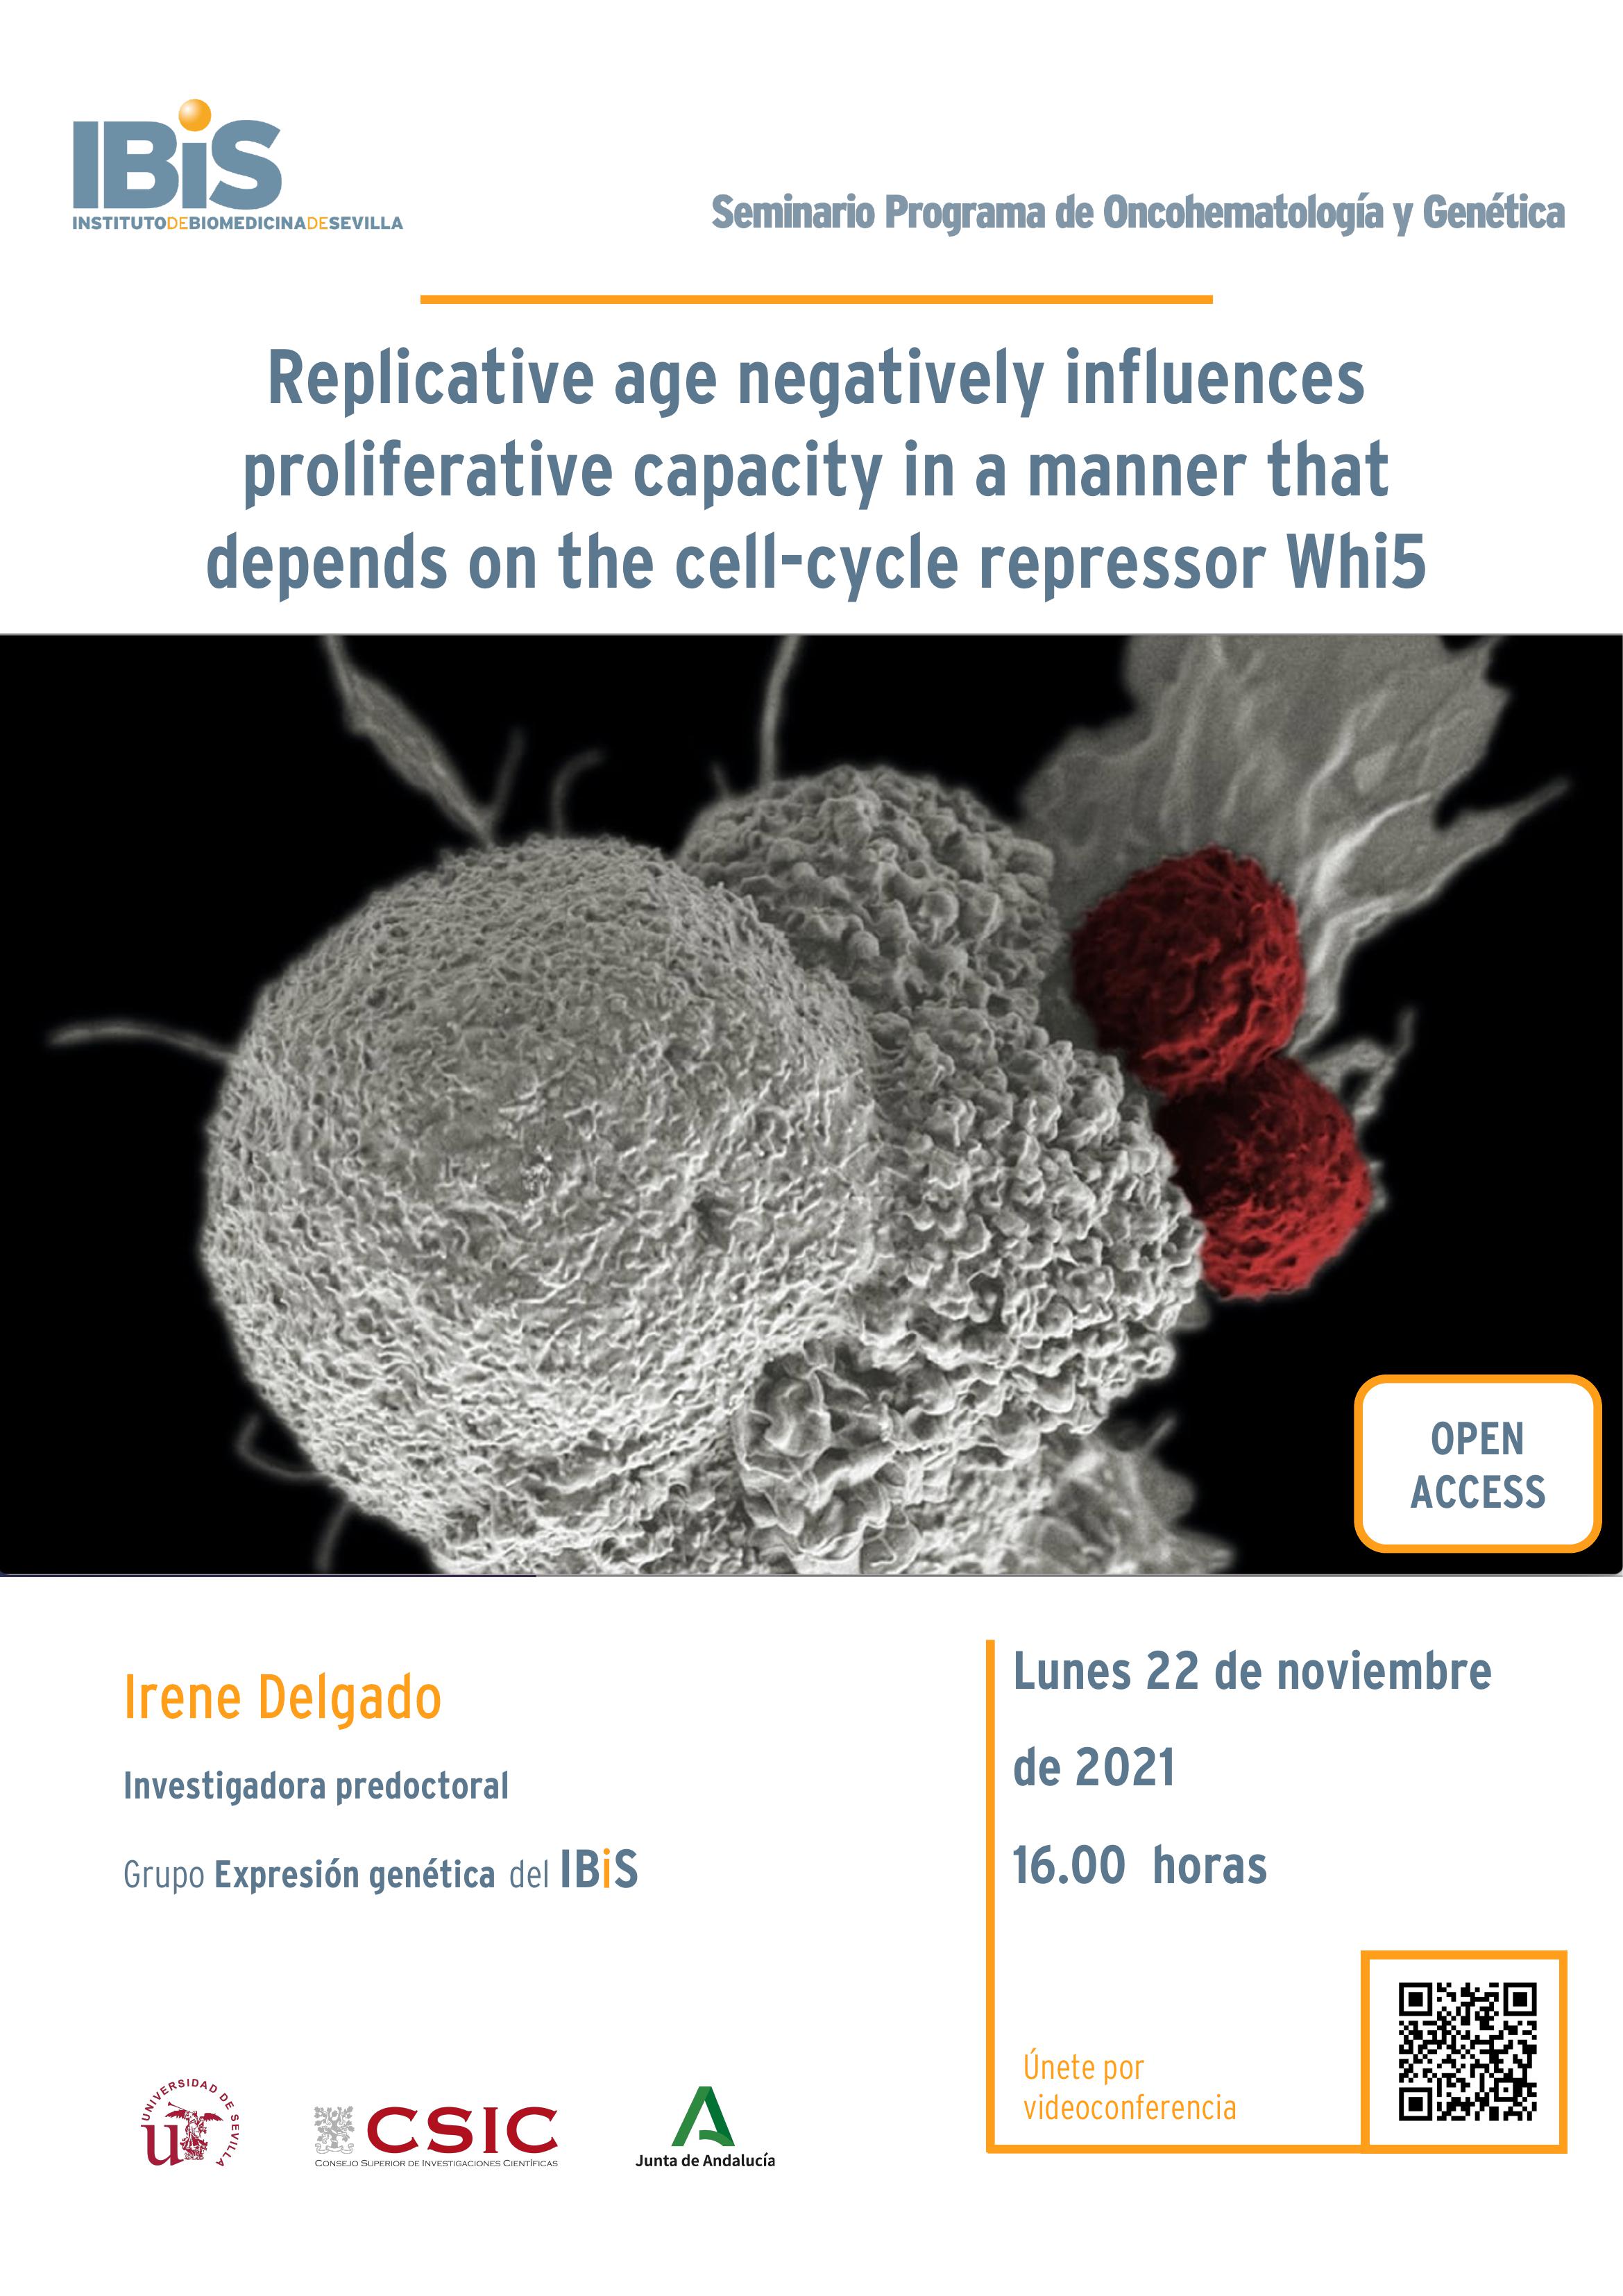 Poster: Replicative age negatively influences proliferative capacity in a manner that depends on the cell-cycle repressor Whi5